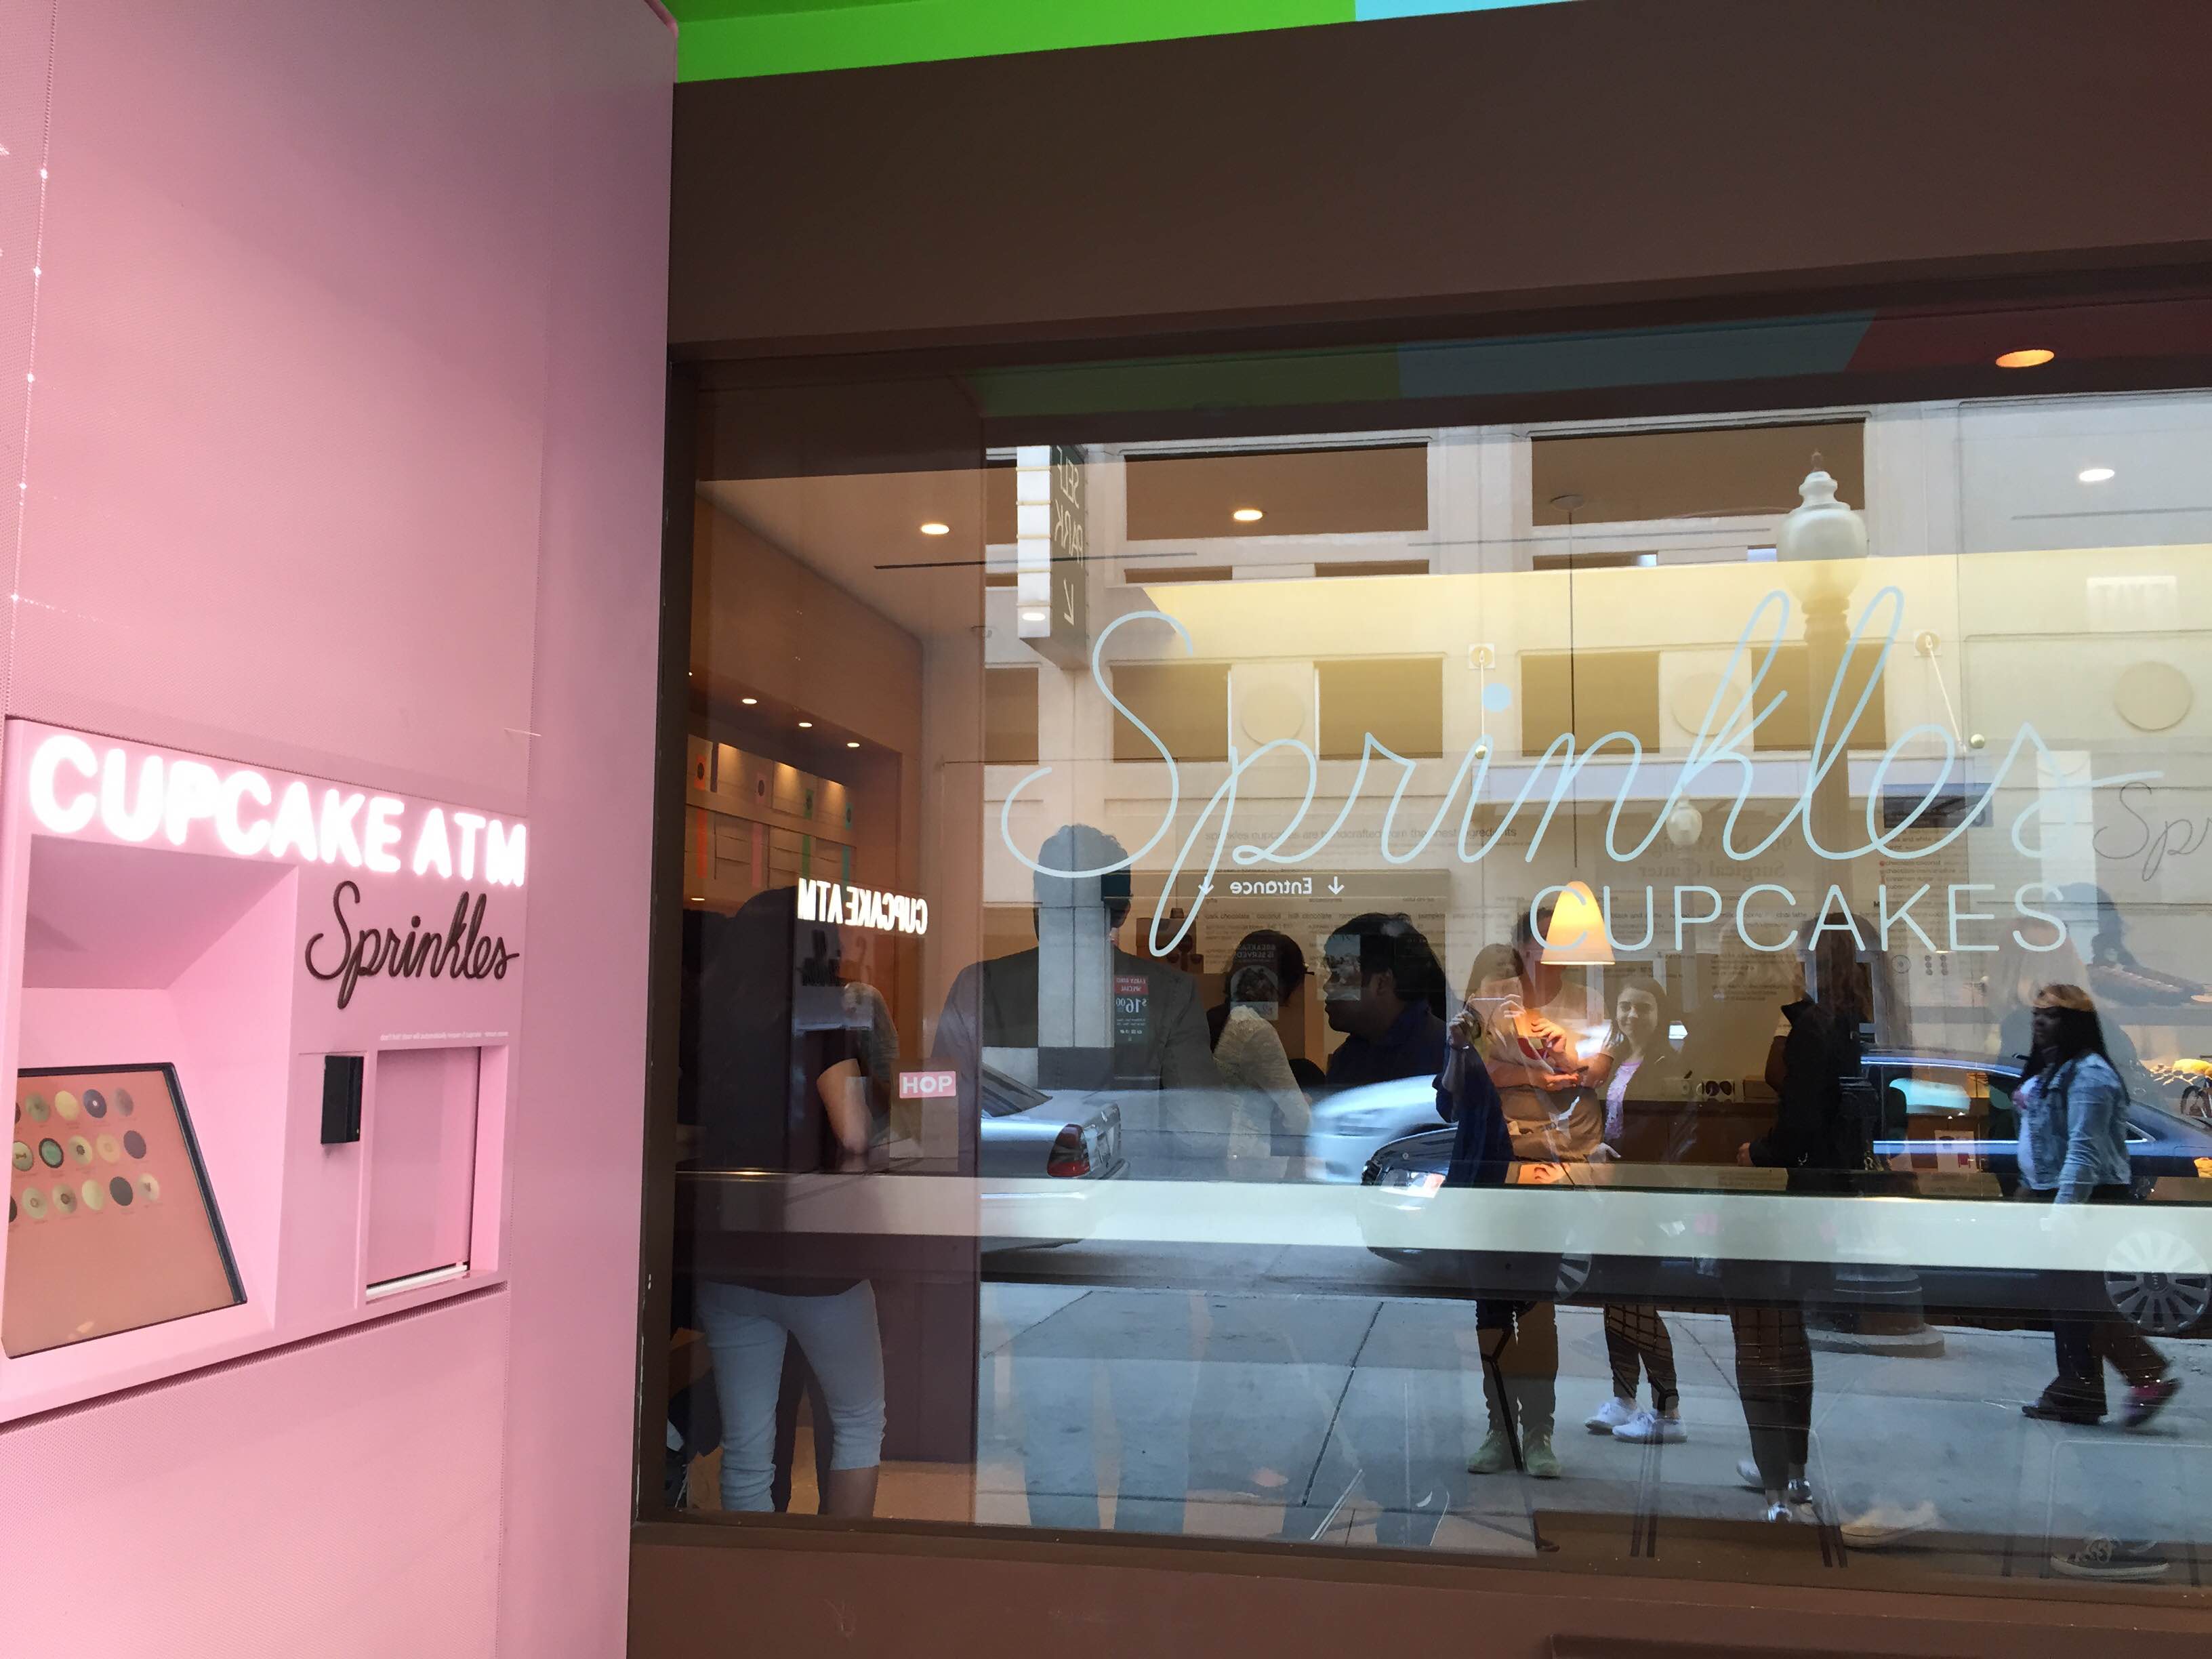 Sprinkles has a cupcake ATM. The future is now and it is delicious